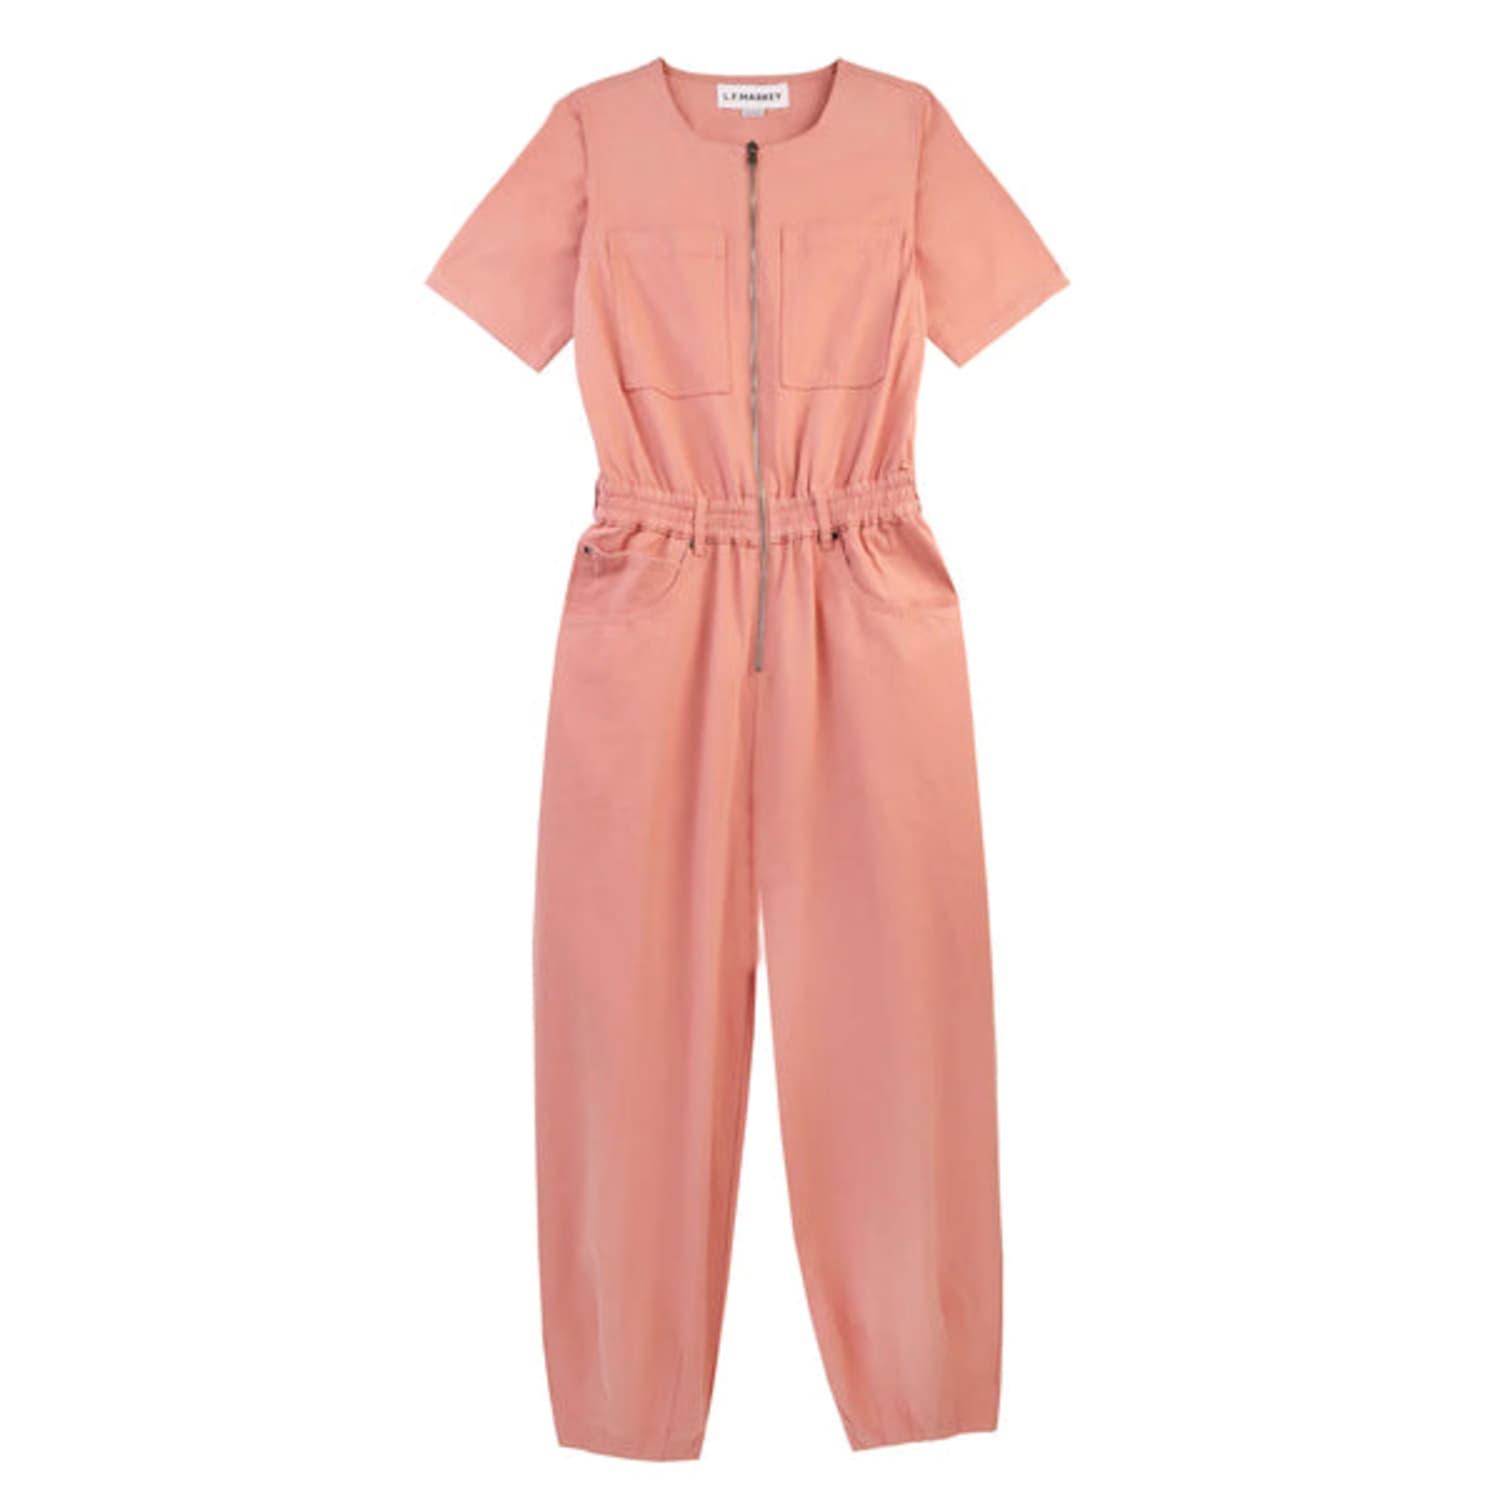 L.F.Markey Blush Francis Boiler Suit in Pink | Lyst